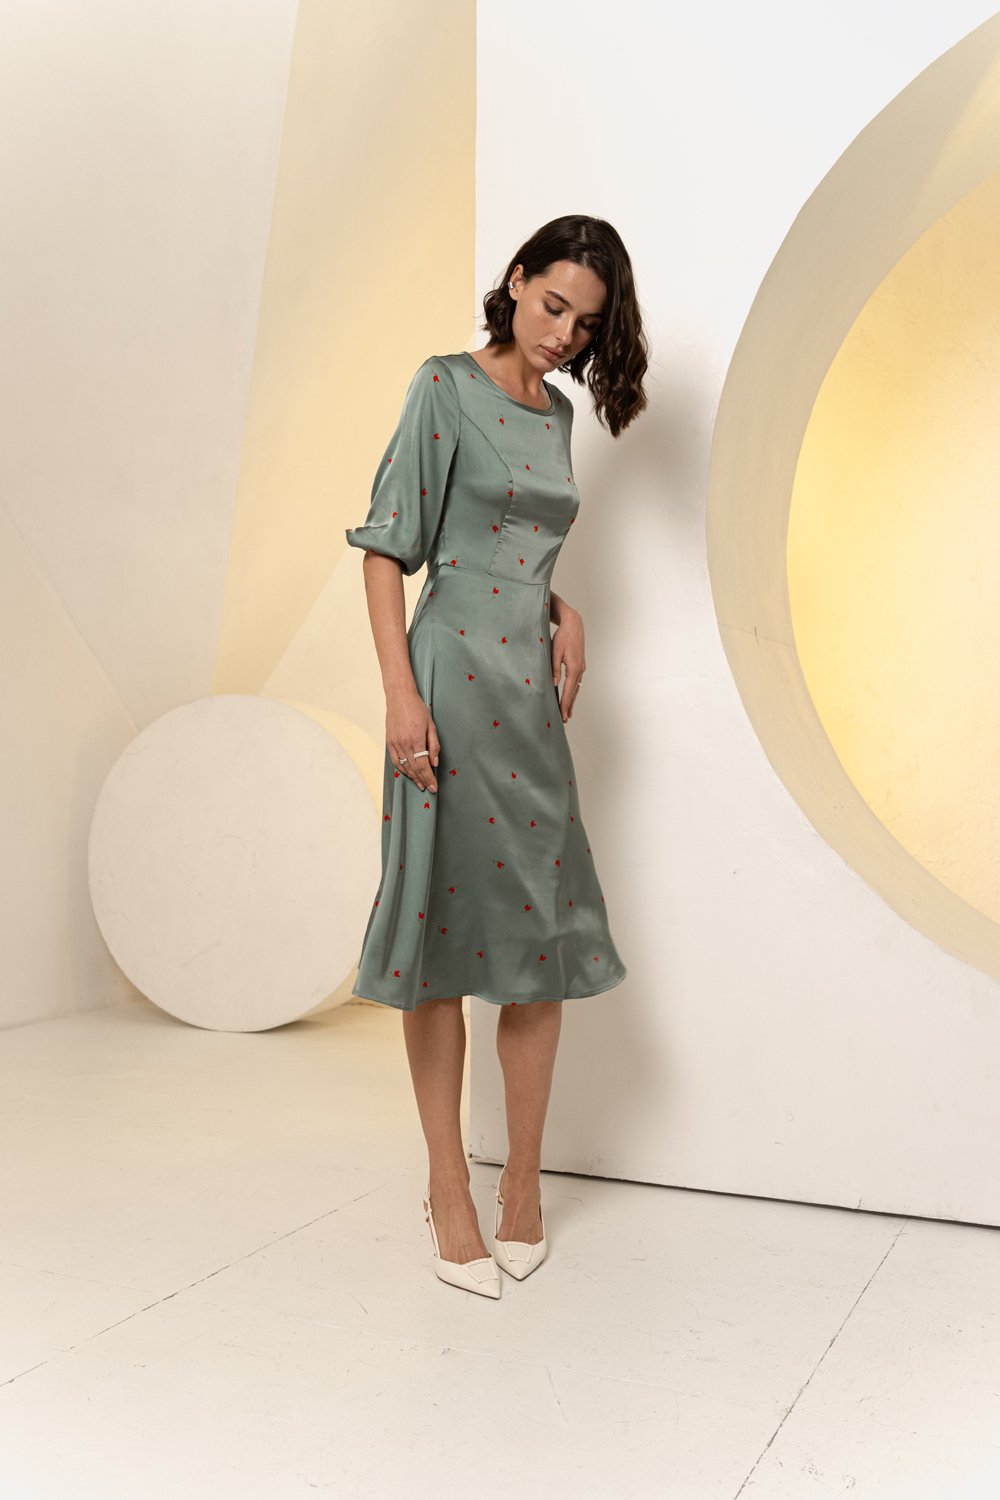 Semi-fitted midi dress with a loose skirt in emerald color